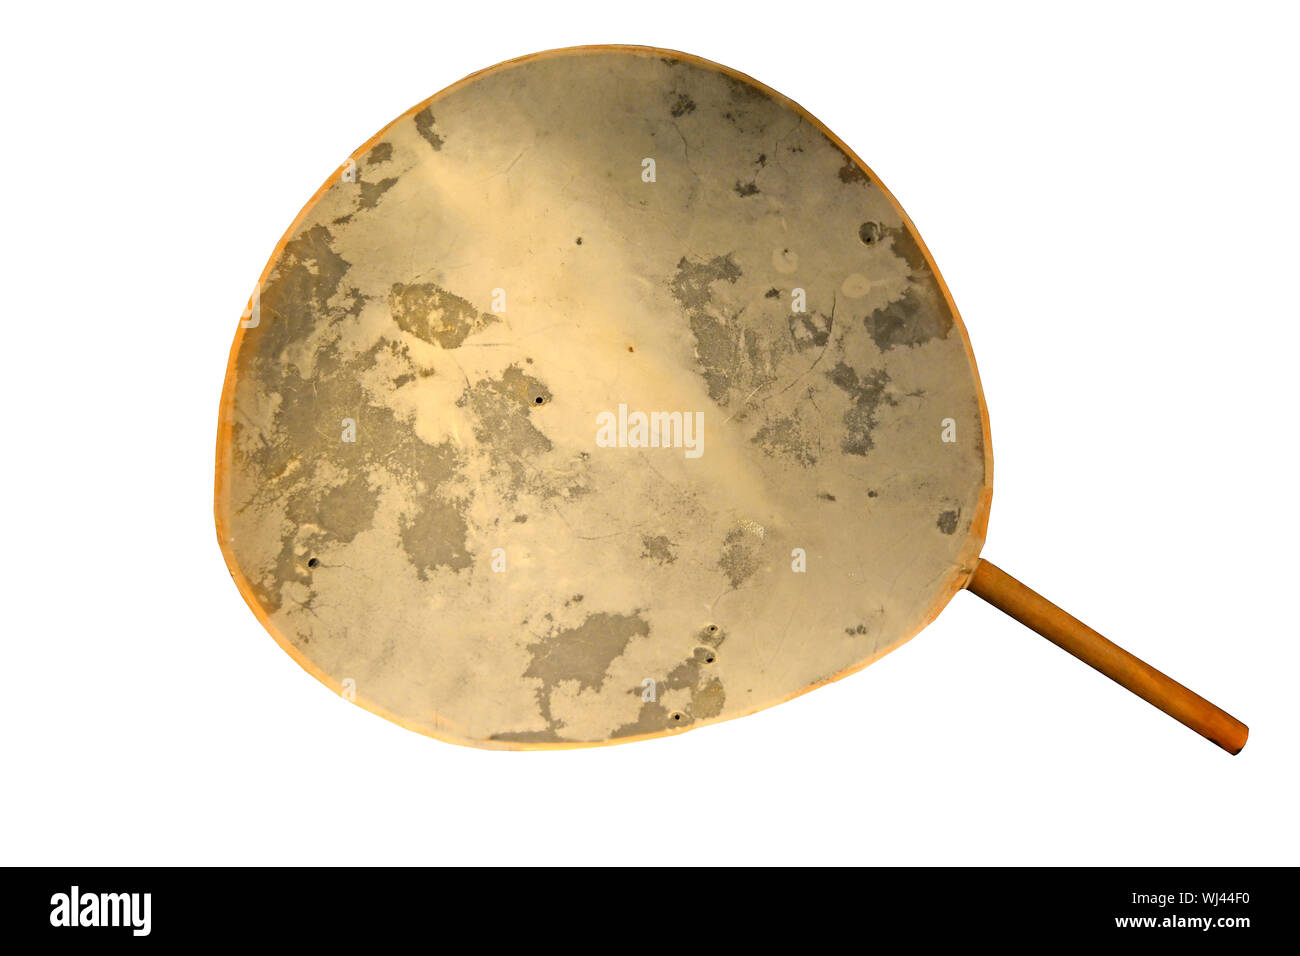 Ice Shamanic Drum made from leather stretched over a thin wooden frame, dating to around 20,000 years ago from Western Europe. Isolated against a whit Stock Photo